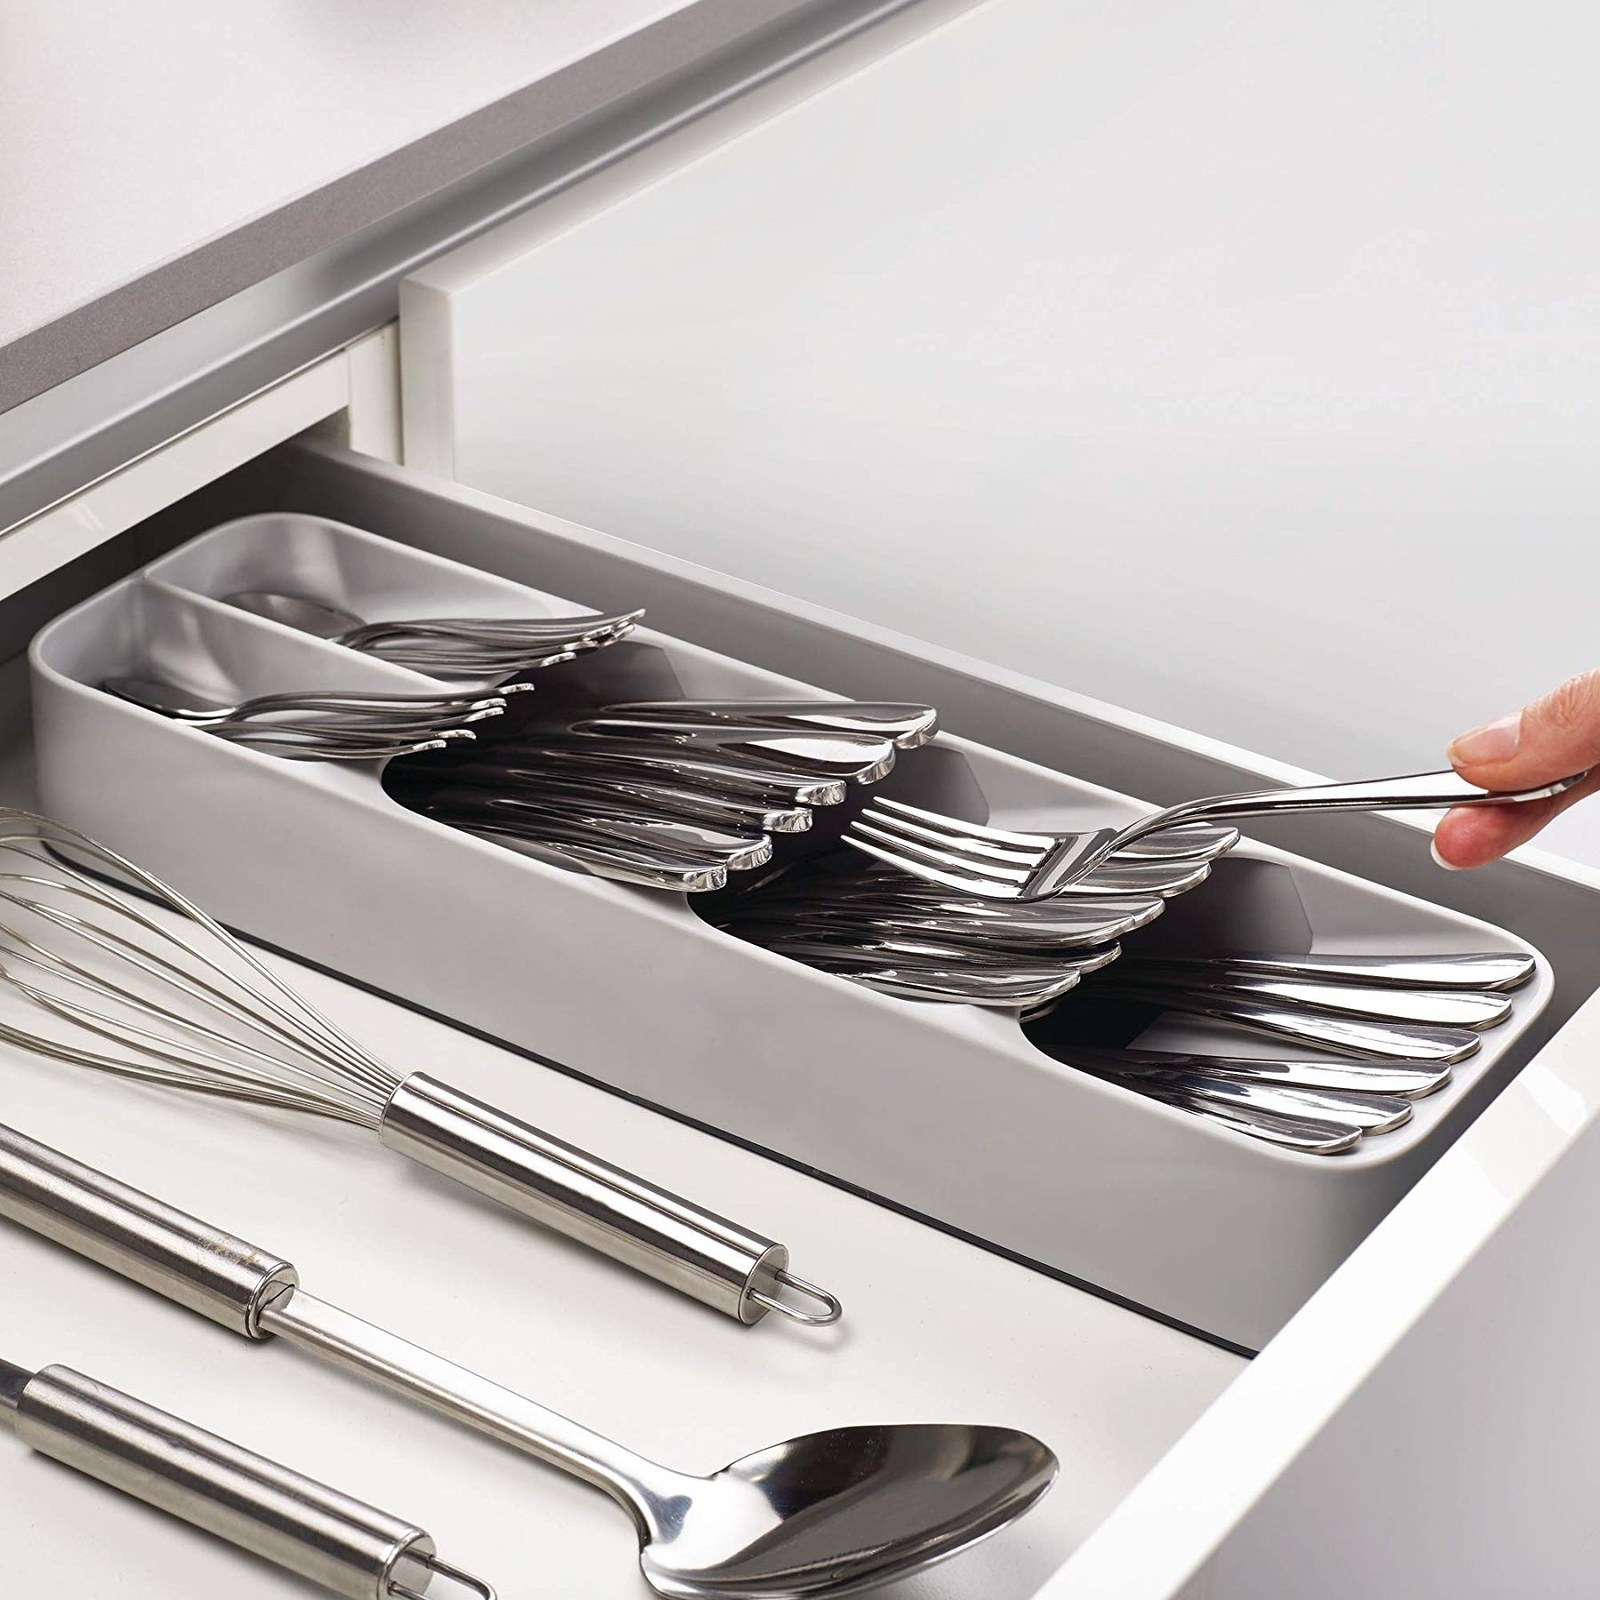 Cutlery in a drawer